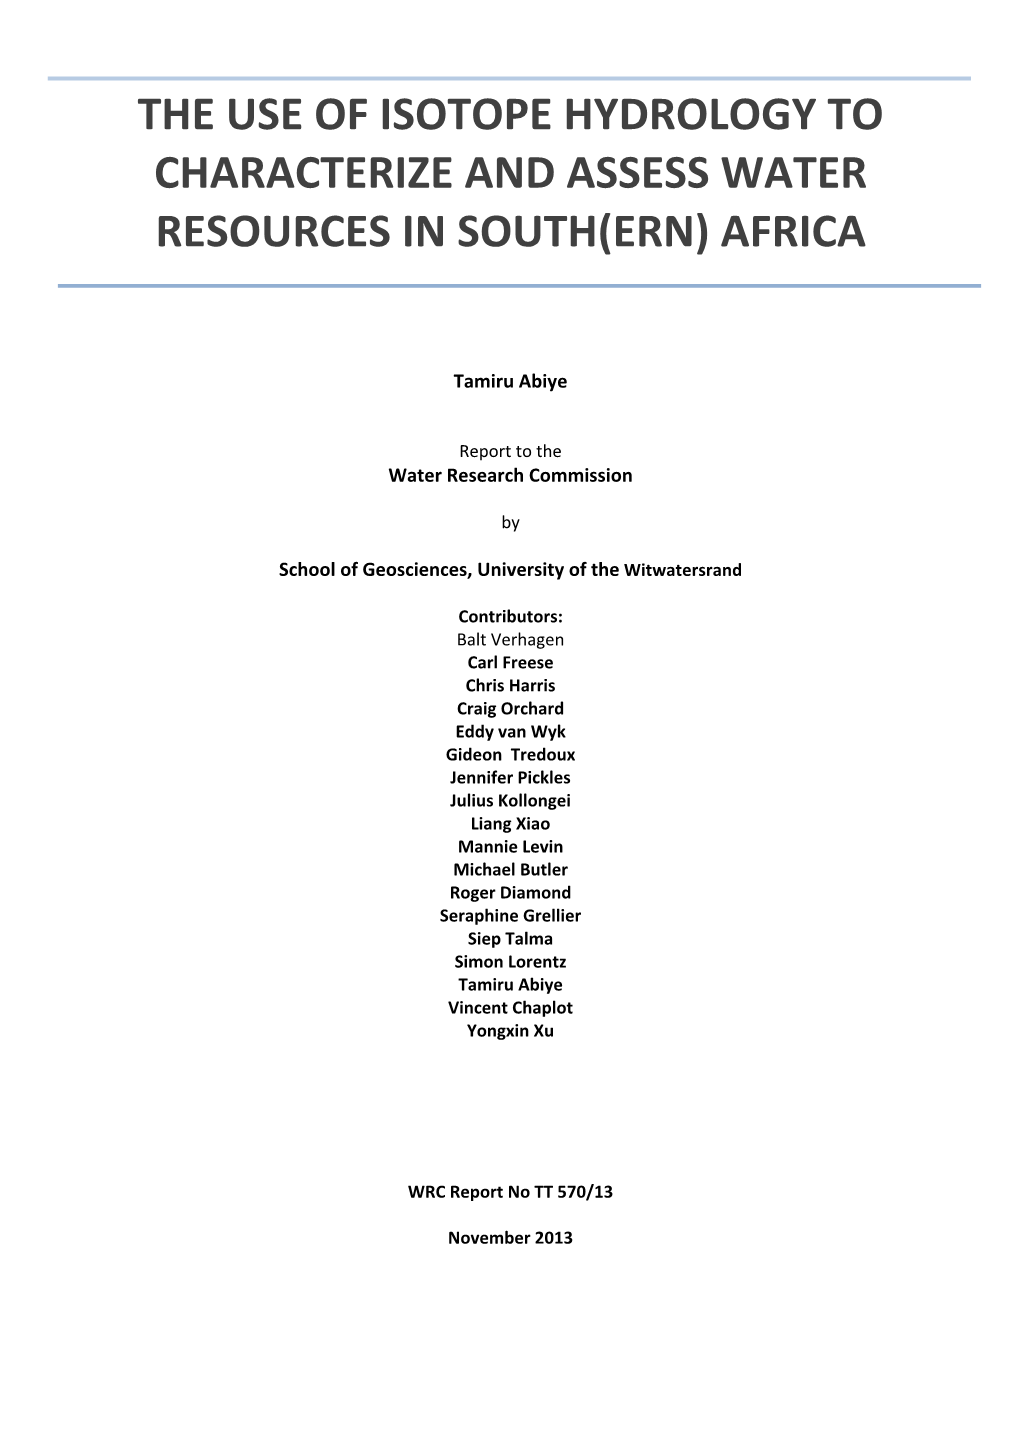 The Use of Isotope Hydrology to Characterize and Assess Water Resources in South(Ern) Africa